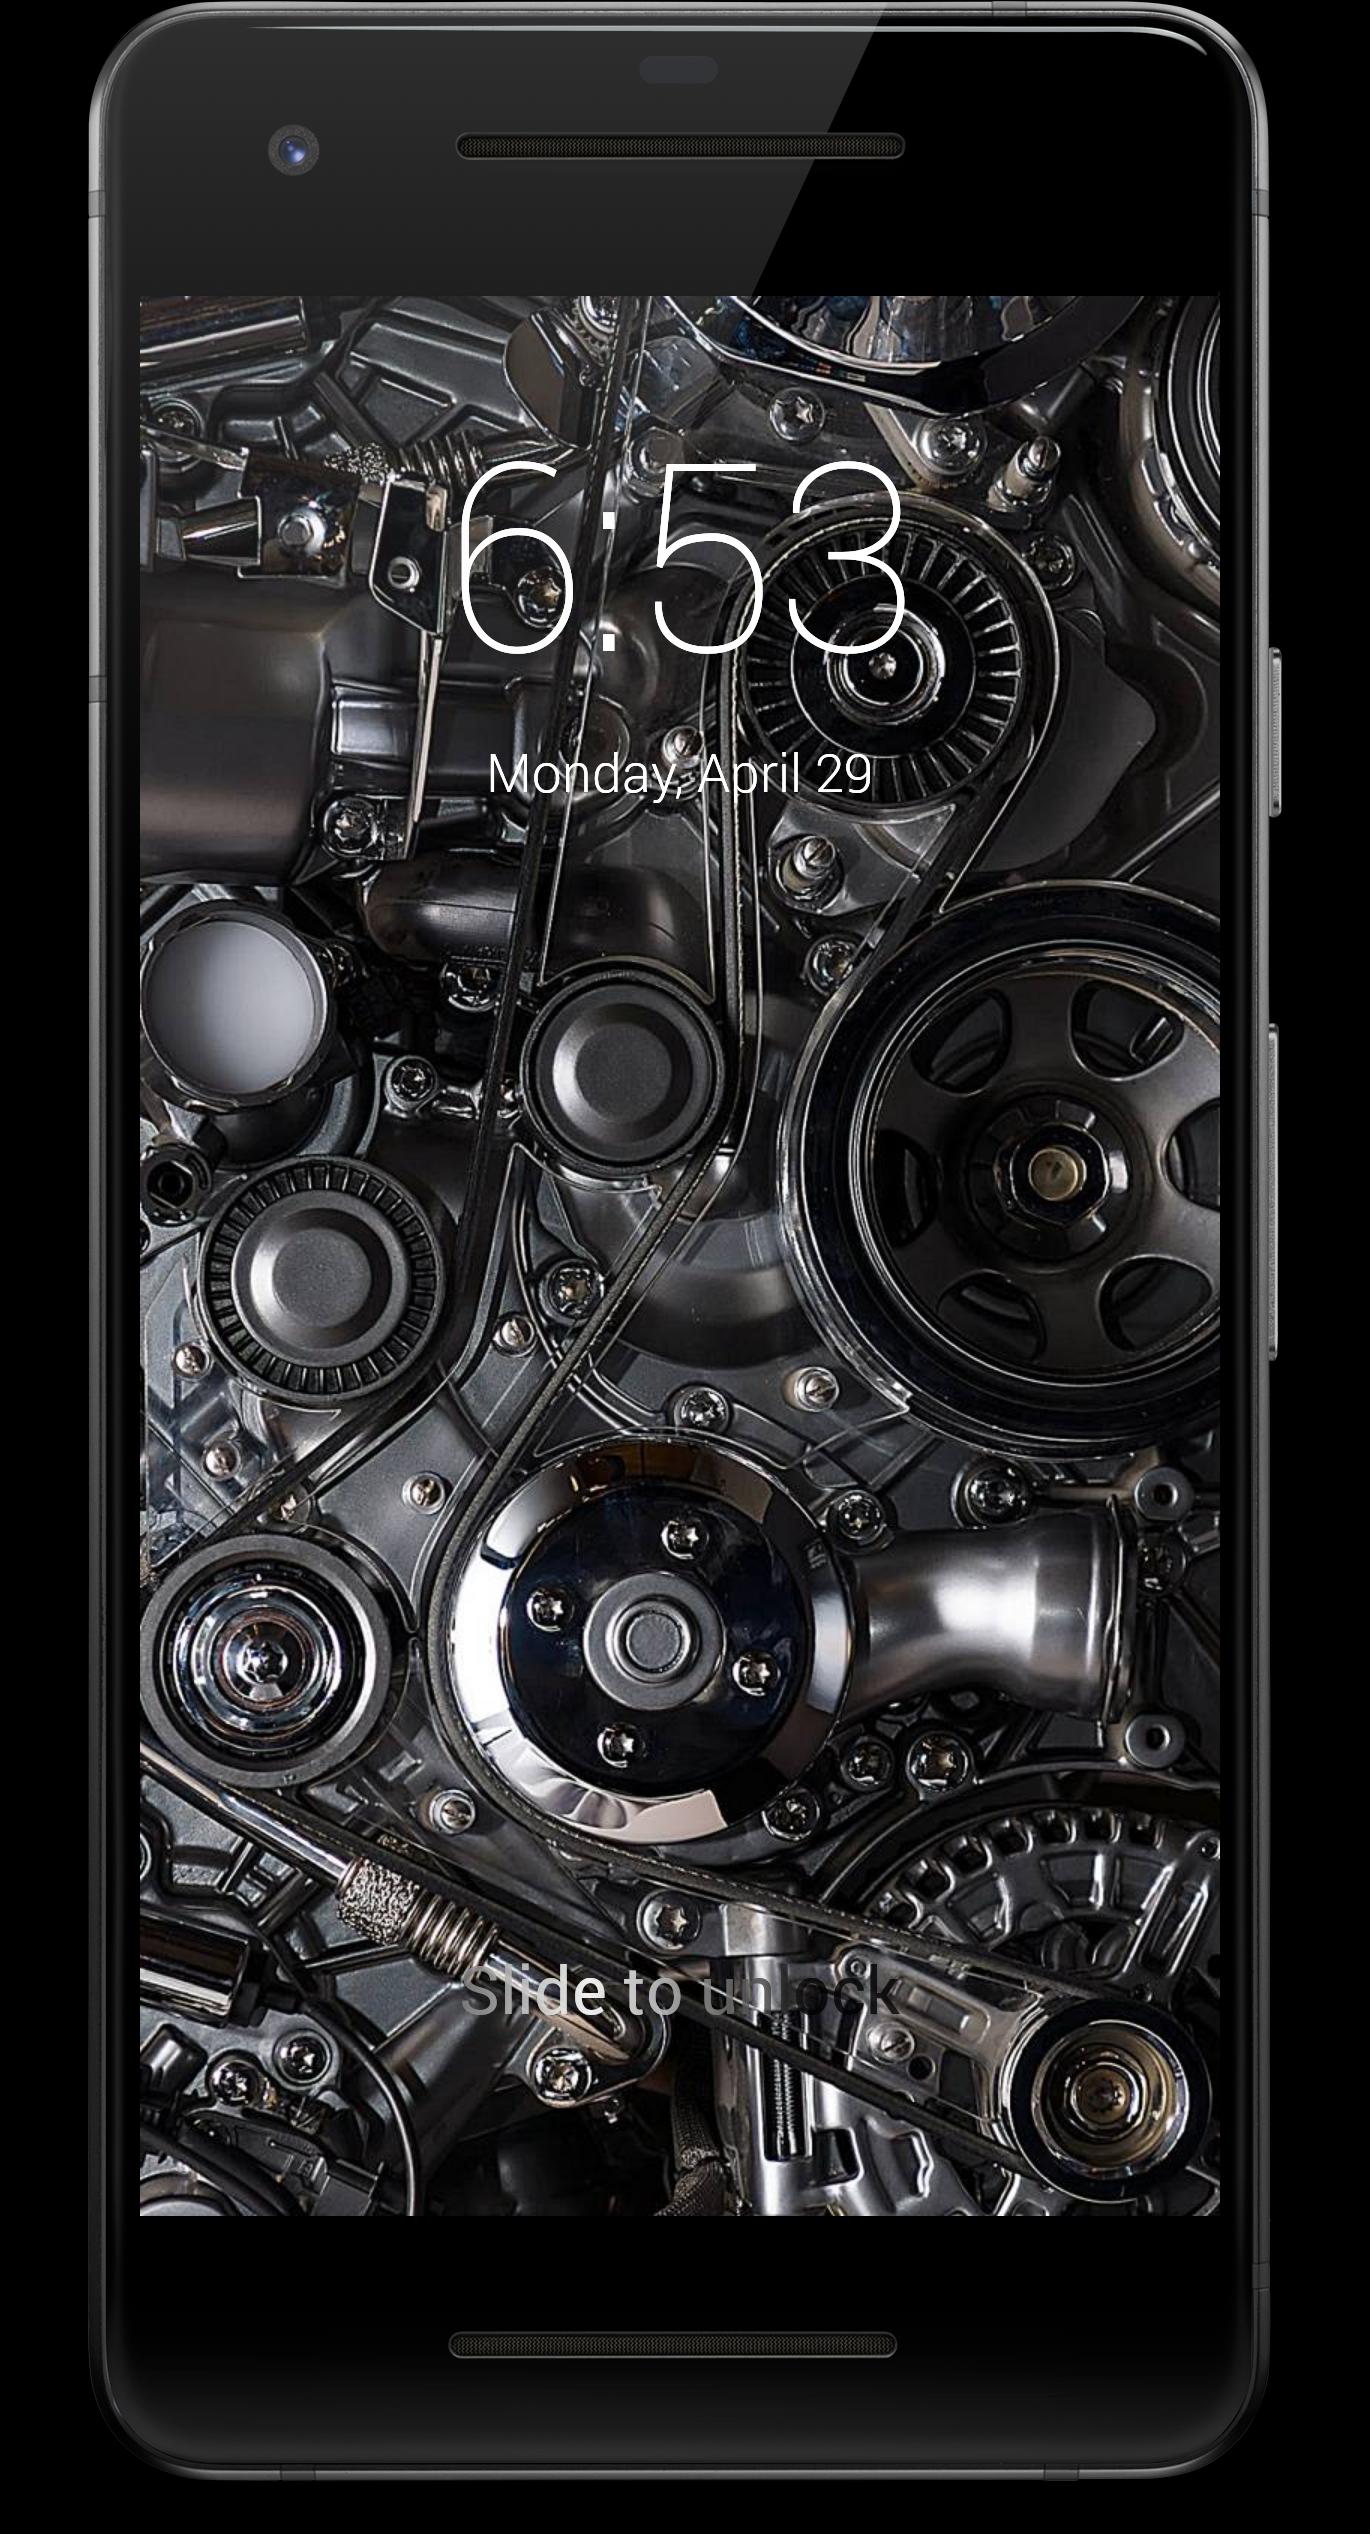 Car Engine HD Lock Screen for Android - APK Download - 